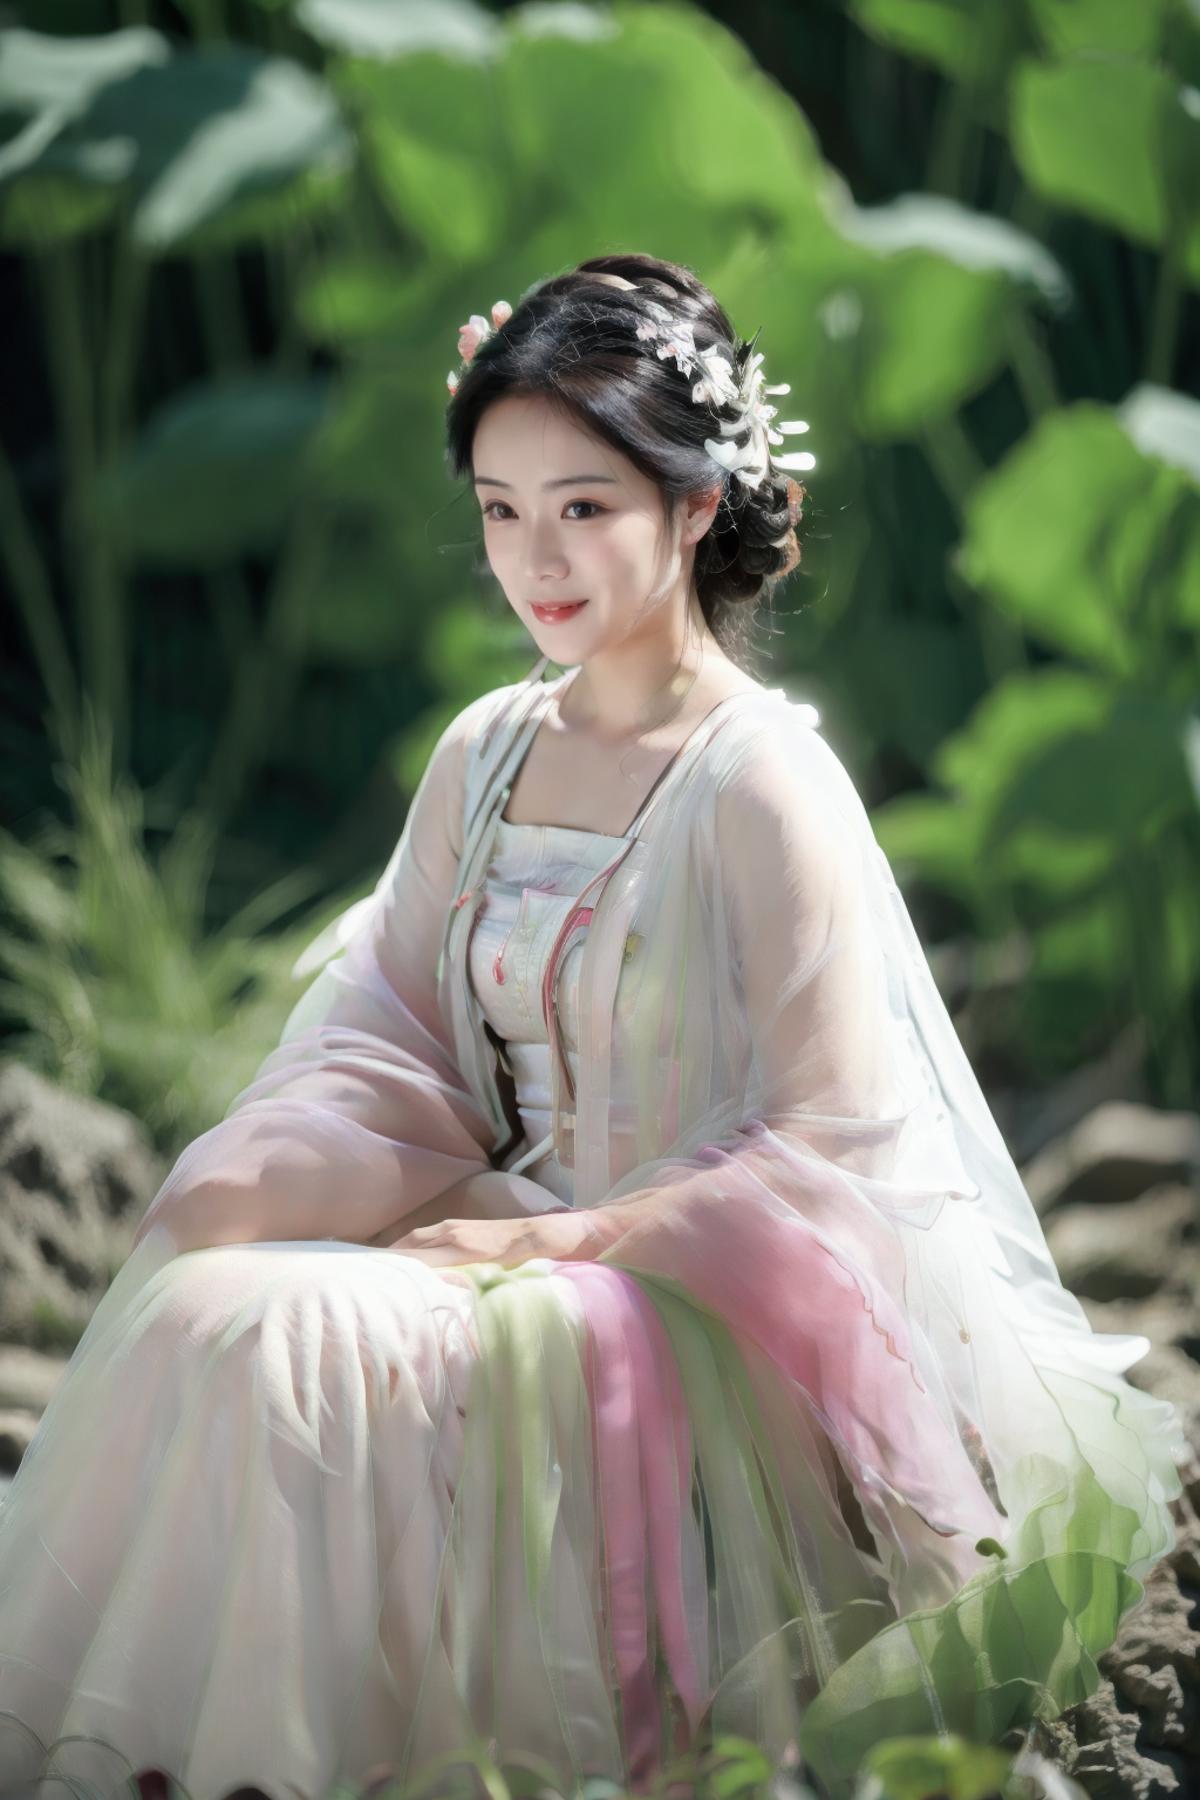 【Realistic】莲花古装 China Dress / Hanfu / Guzhuang / Acient Chinese Dress image by EmptyBellPainter